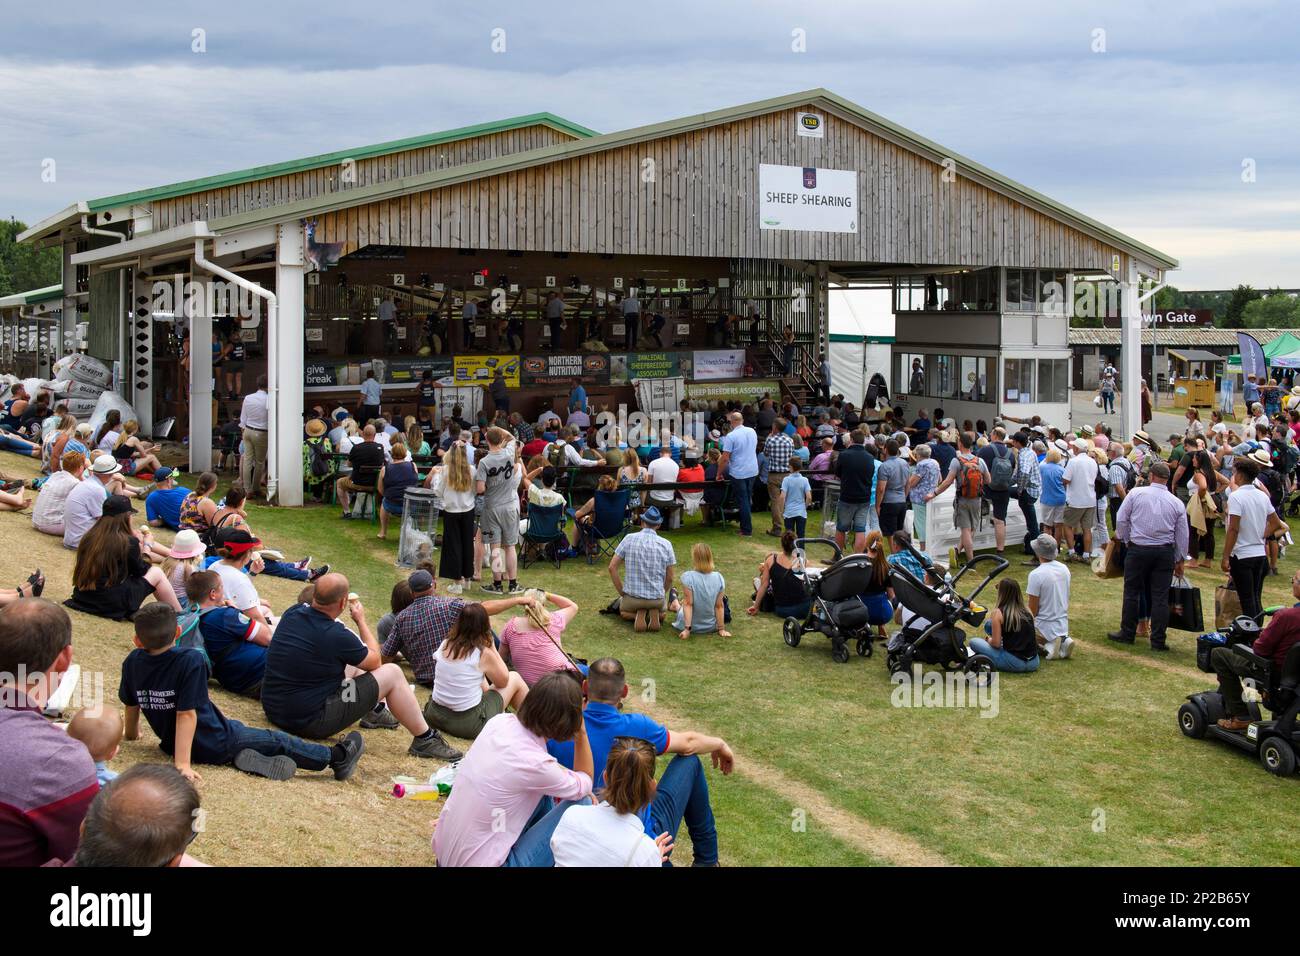 Crowds of visitors watch shearers compete (busy traditional outdoor  entertainment event in shed barn) - Great Yorkshire Show, Harrogate, England, UK. Stock Photo